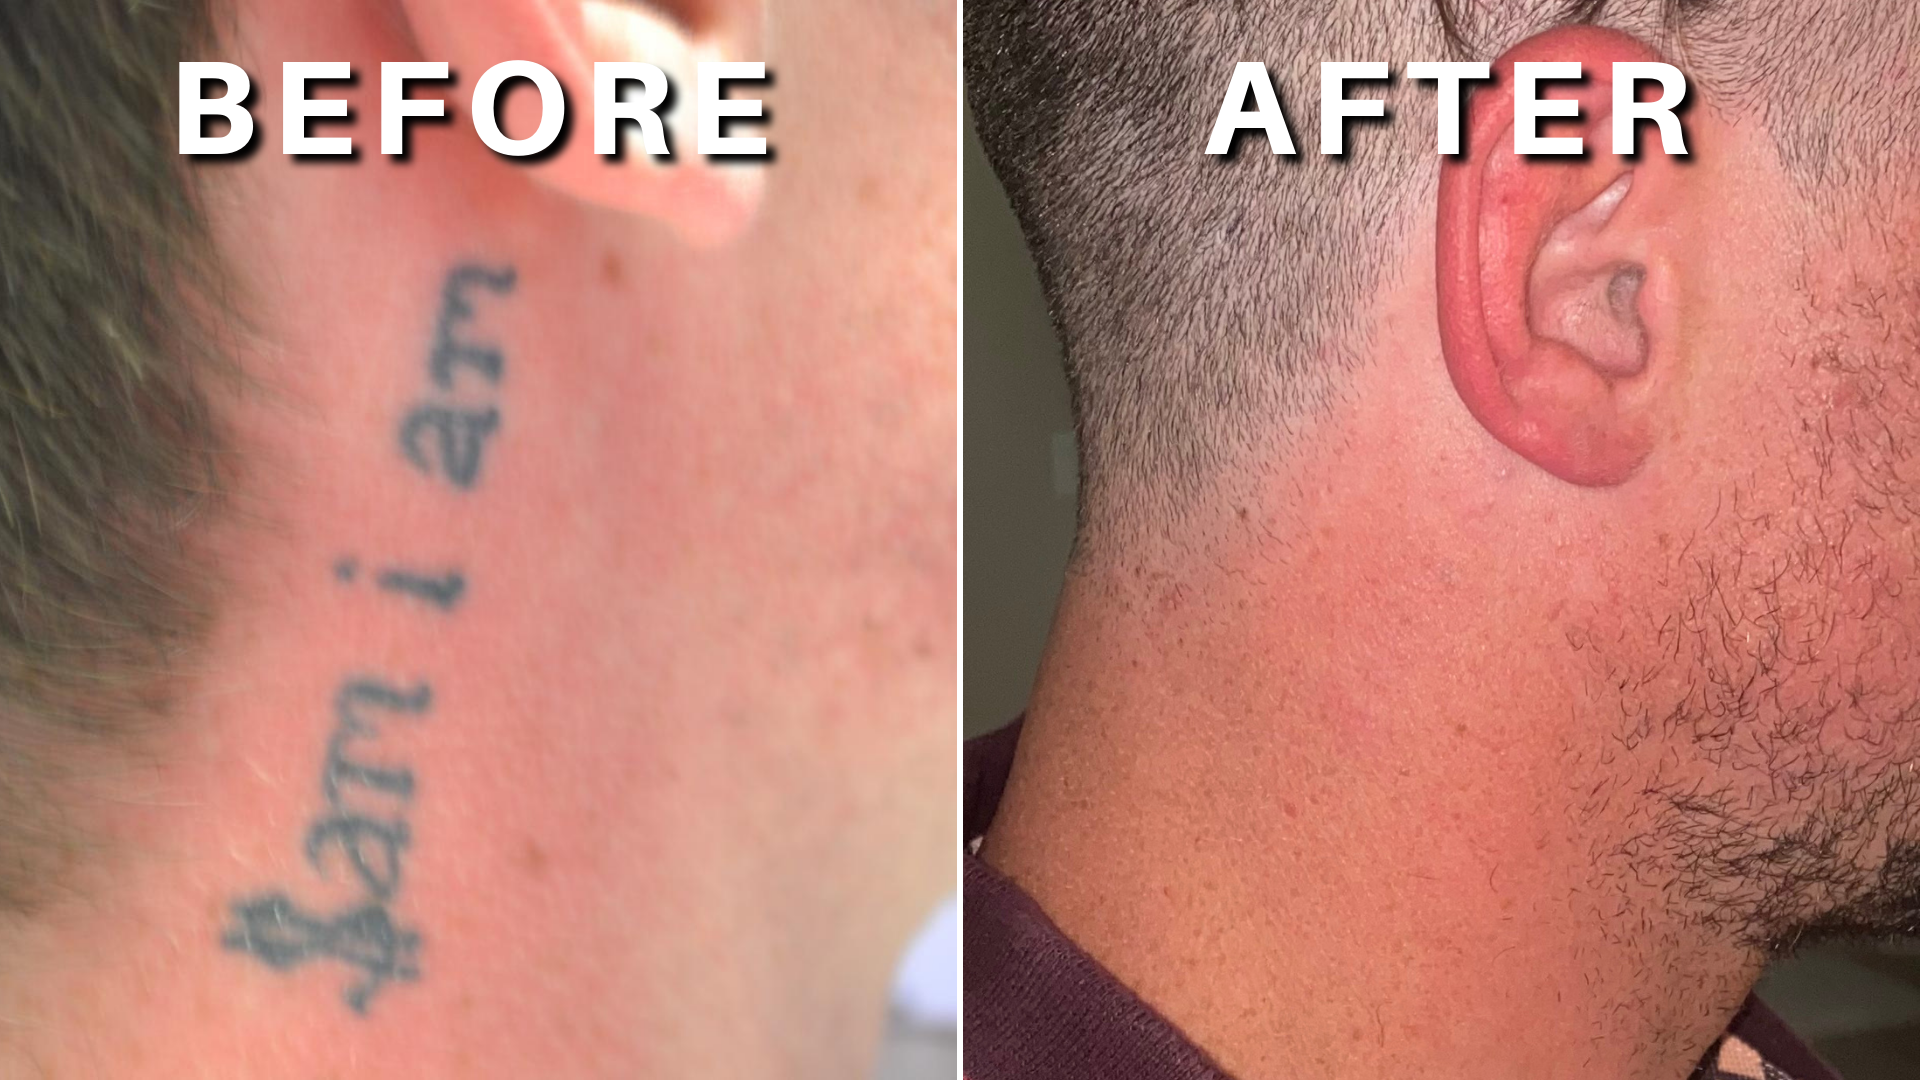 Gallery - DFW Tattoo Removal